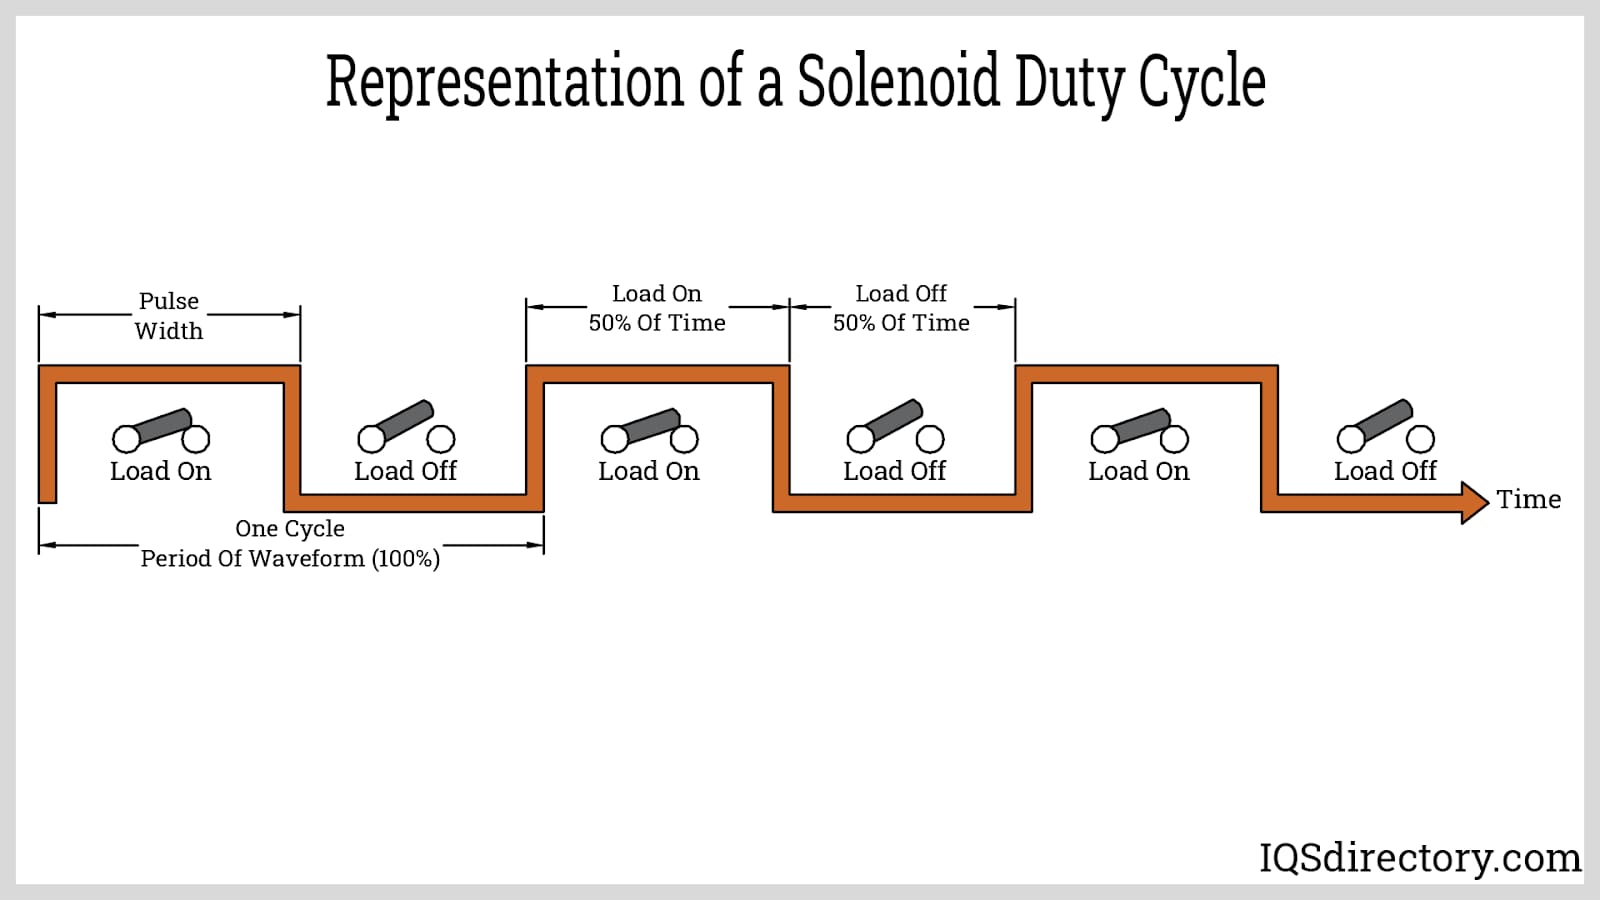 Representation of a Solenoid Duty Cycle